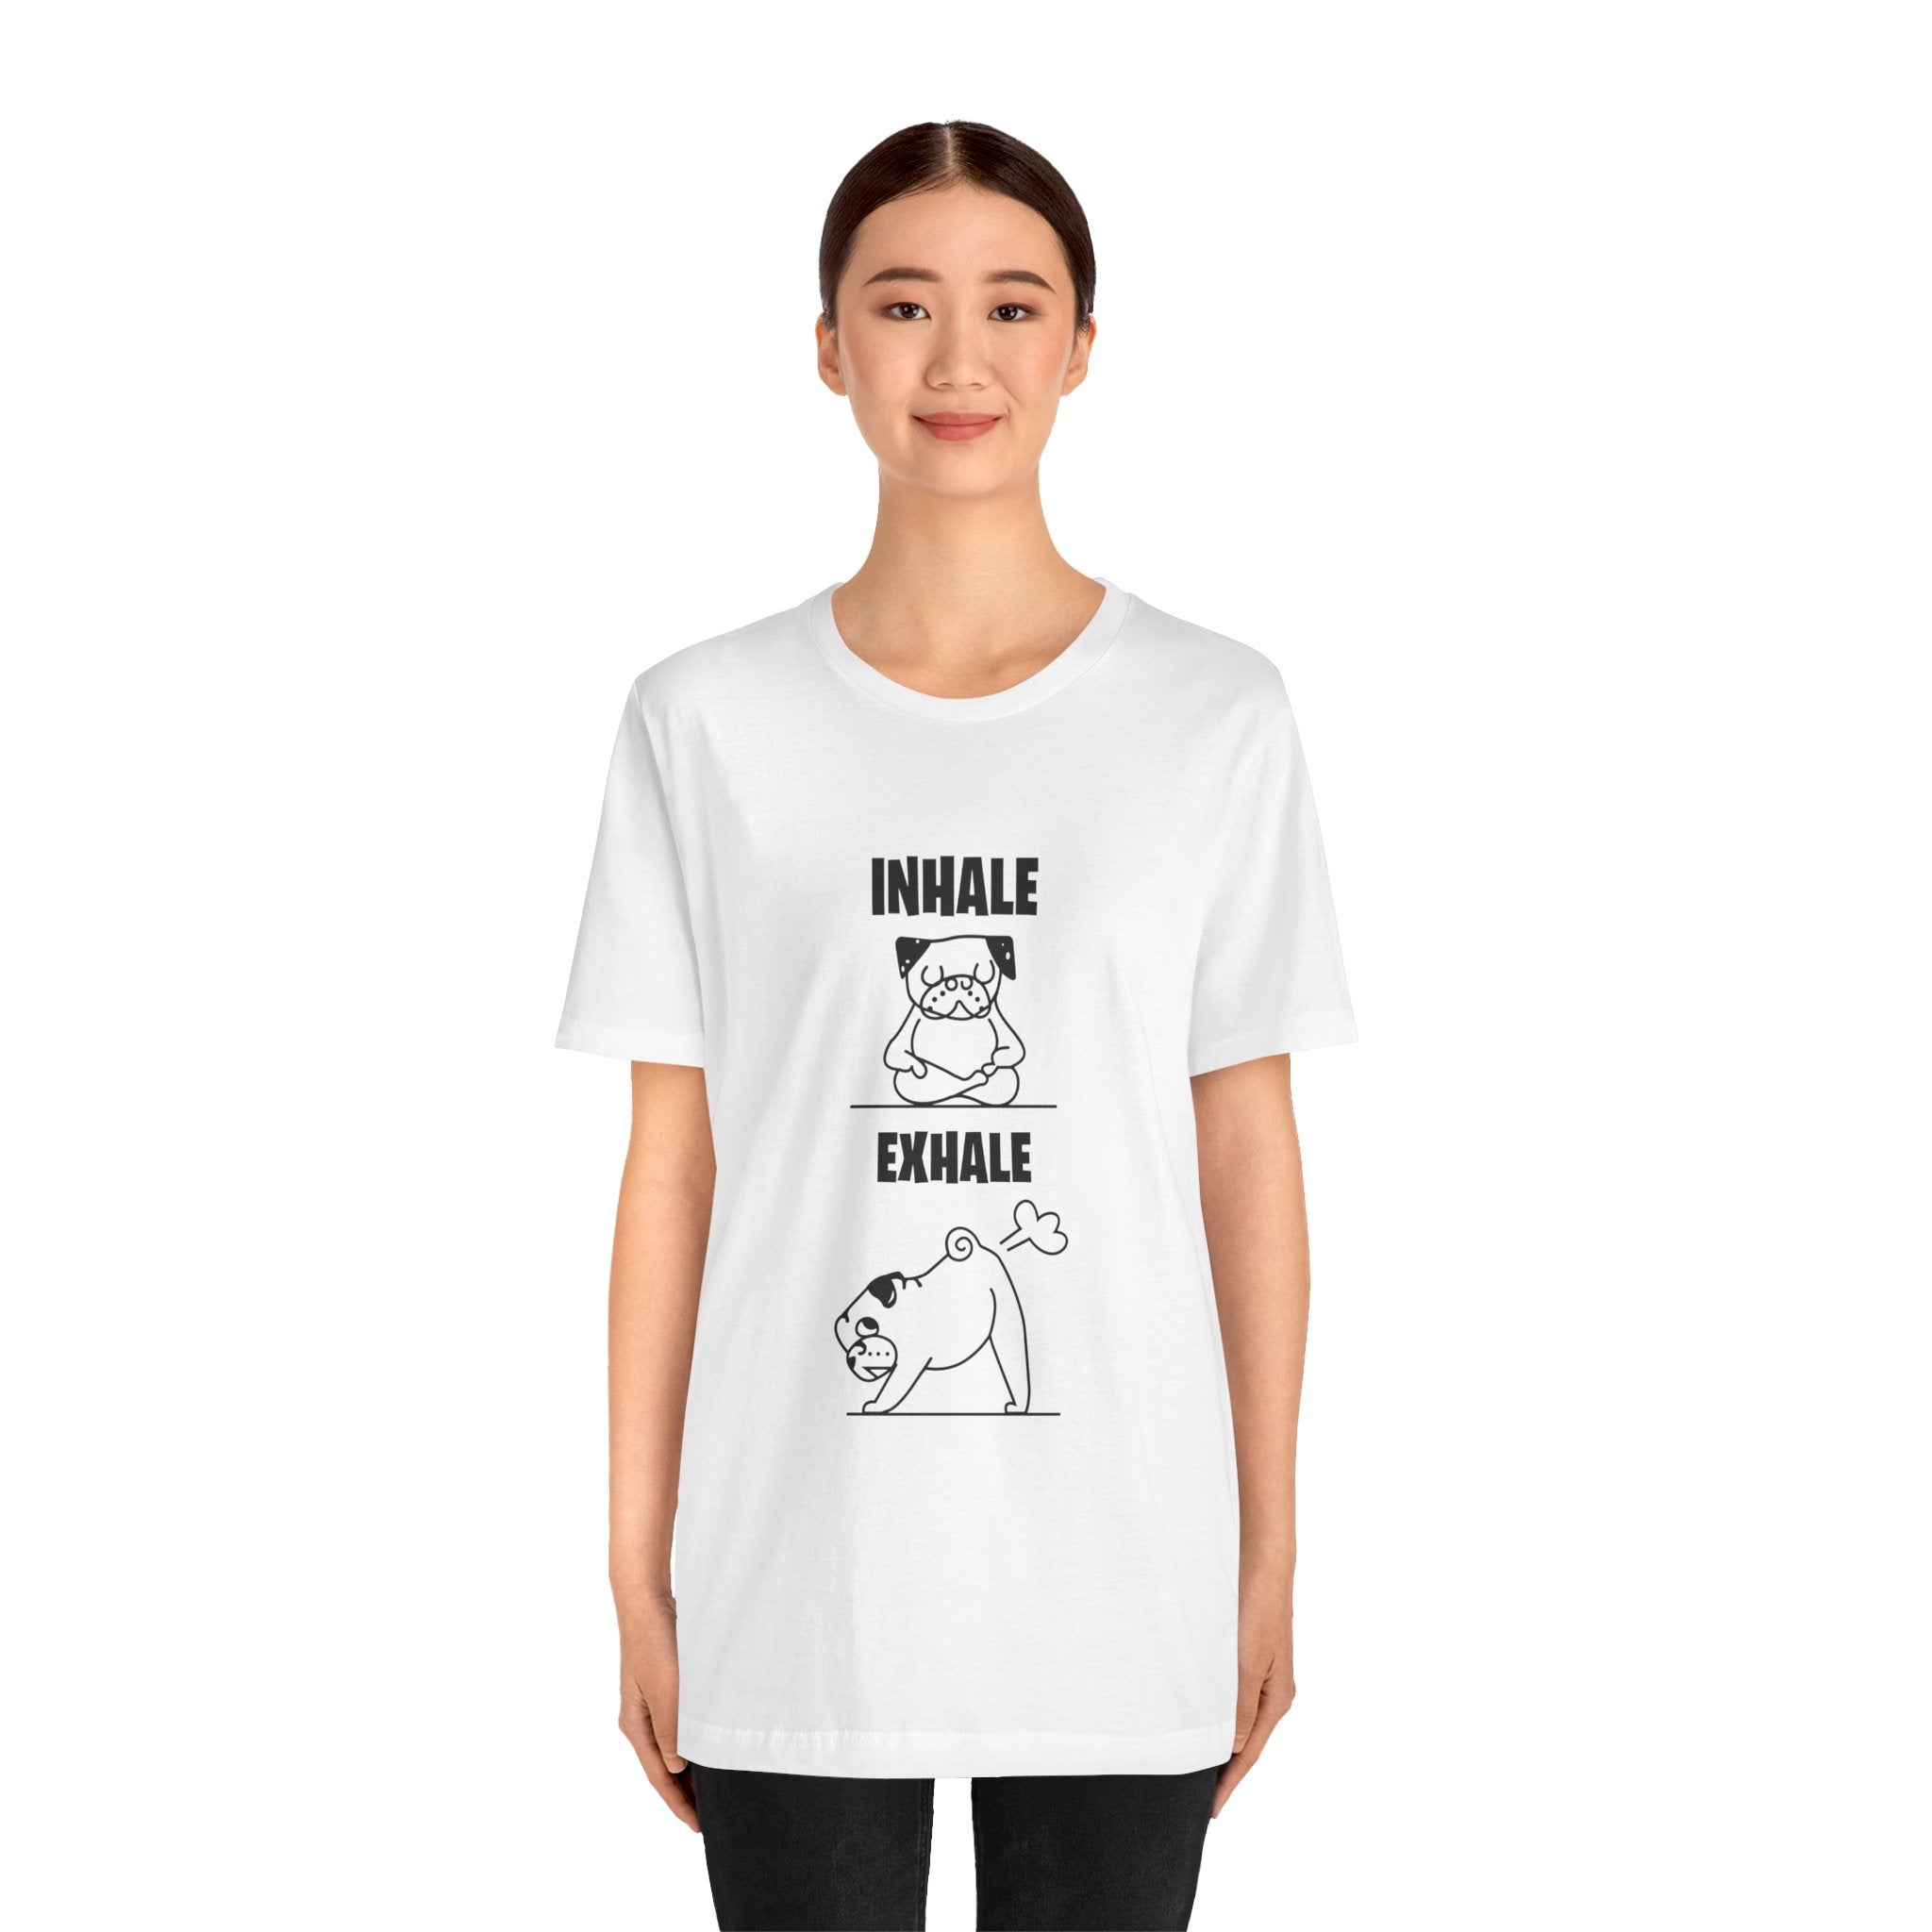 A young woman wearing a Dog Funny T shirt with a quality print cartoon of a dog performing yoga on the front, labeled "inhale exhale.